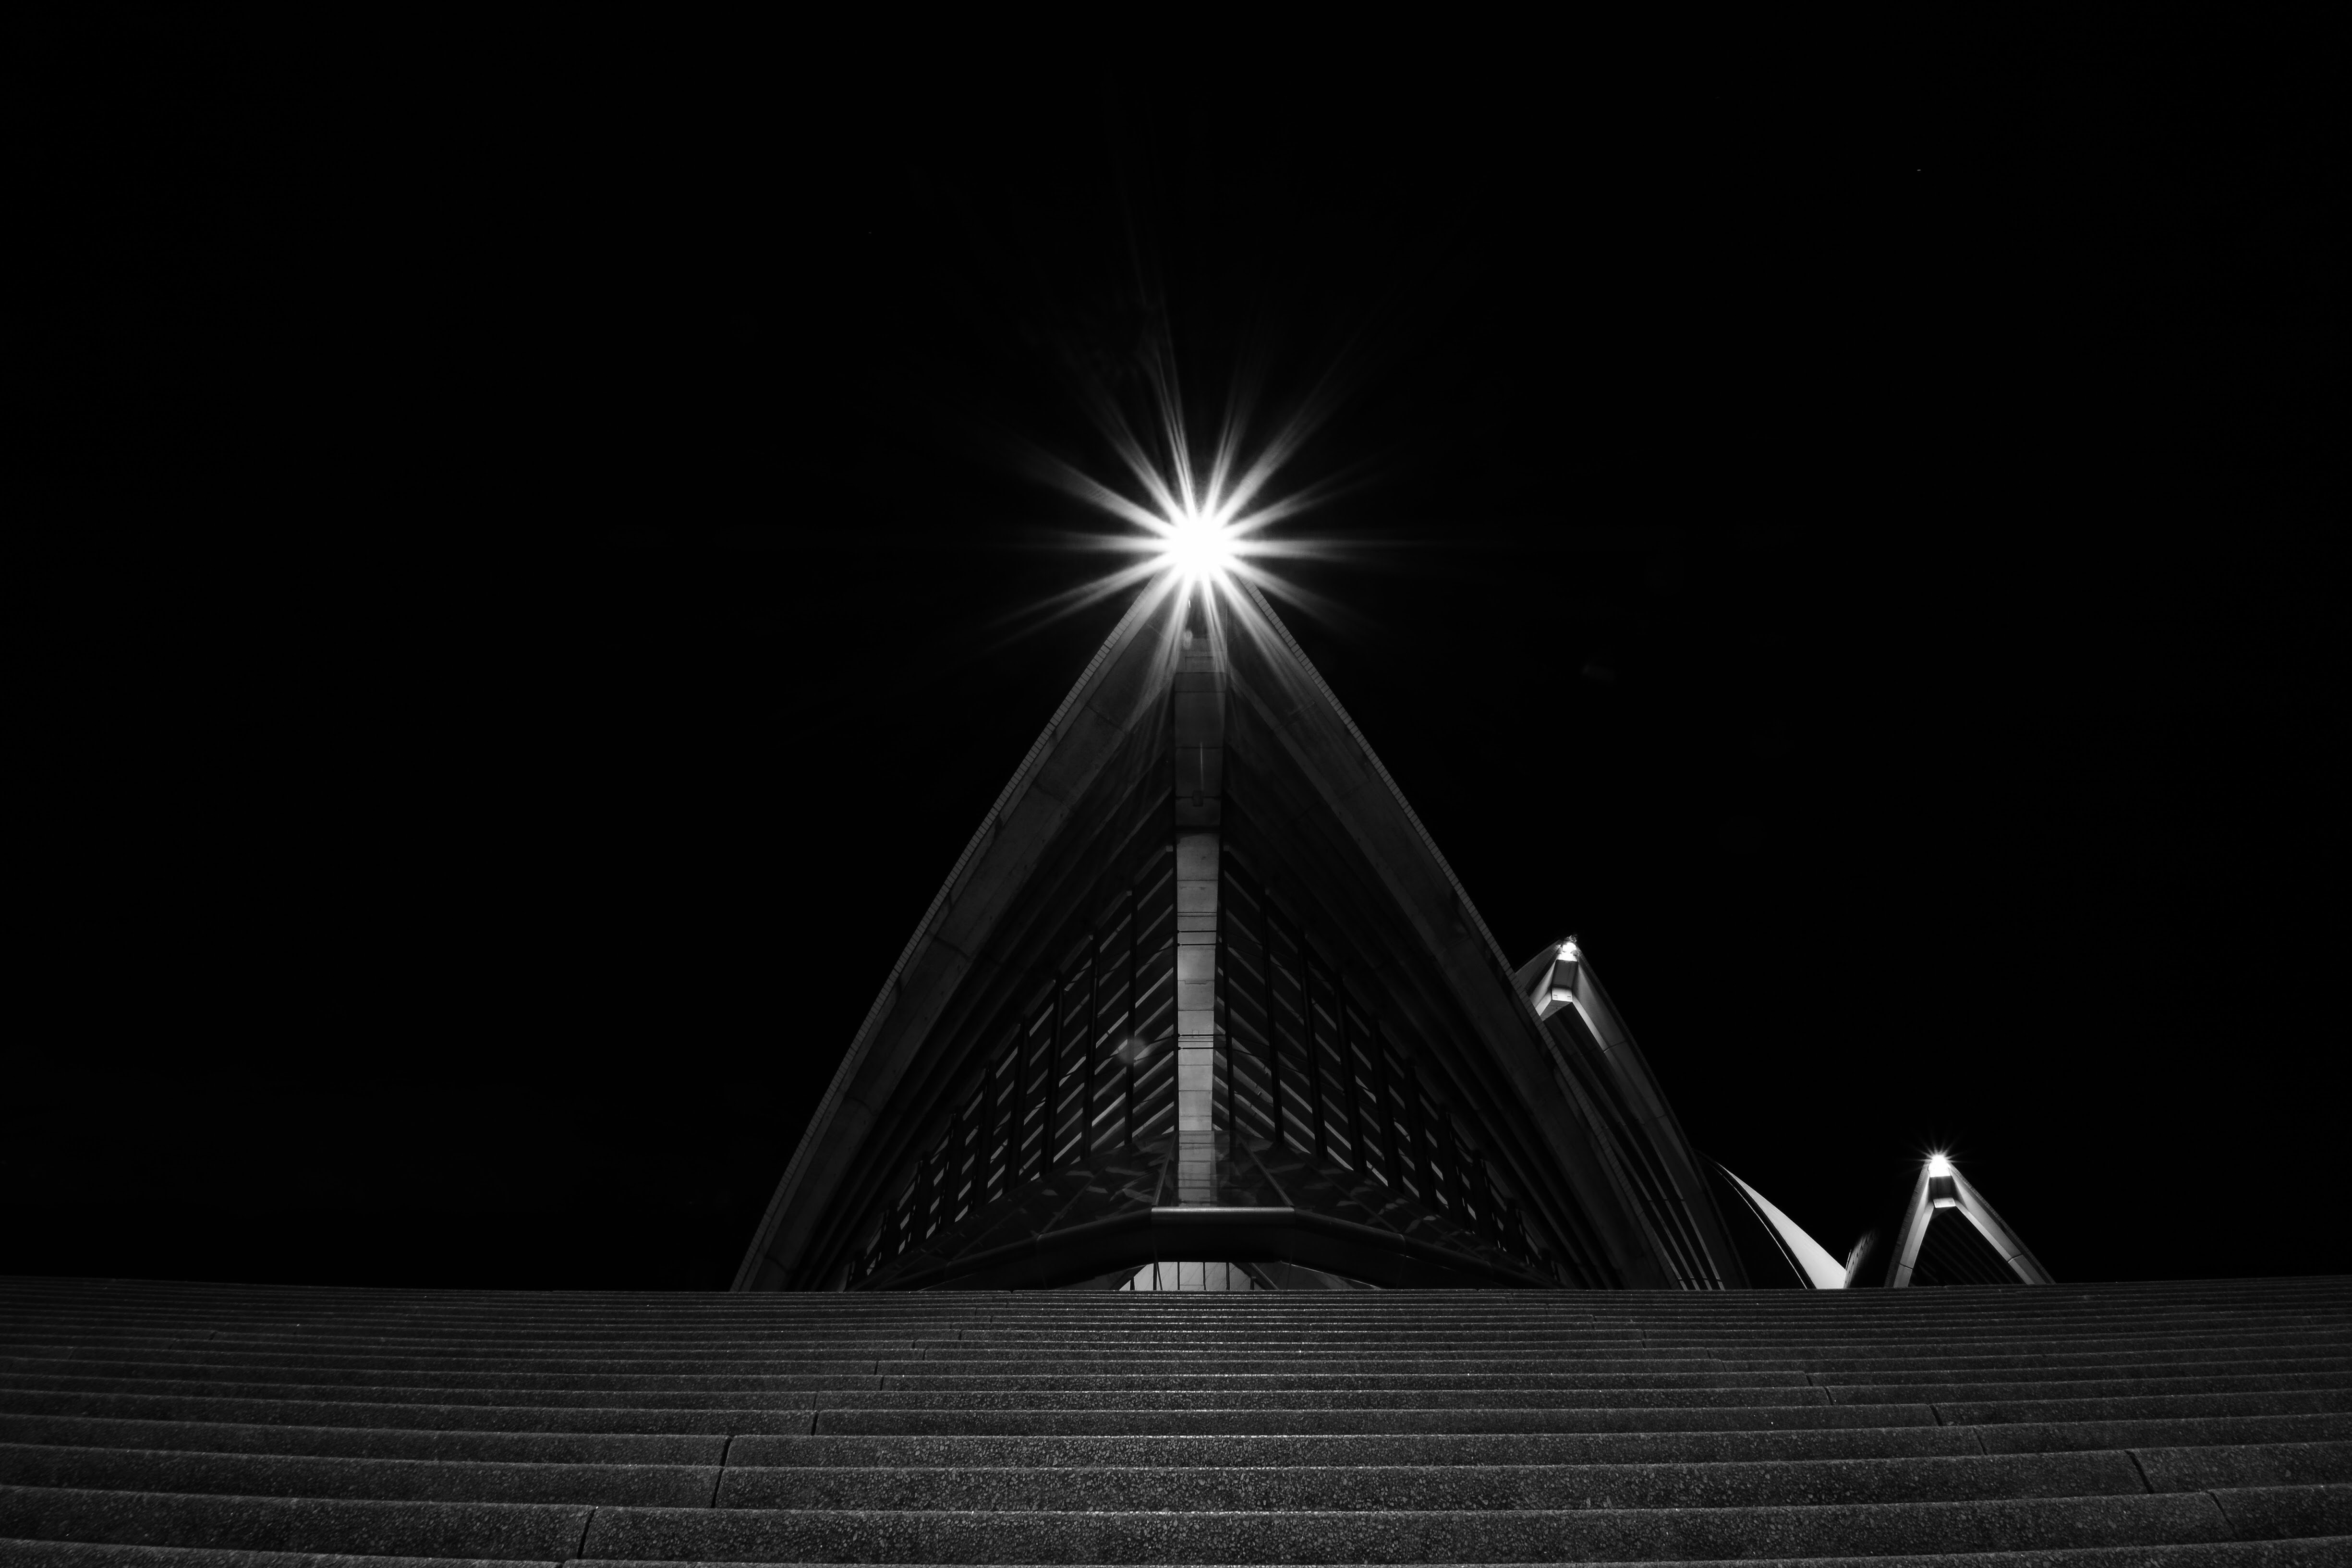 Wallpaper for mobile devices sydney, bw, black, architecture